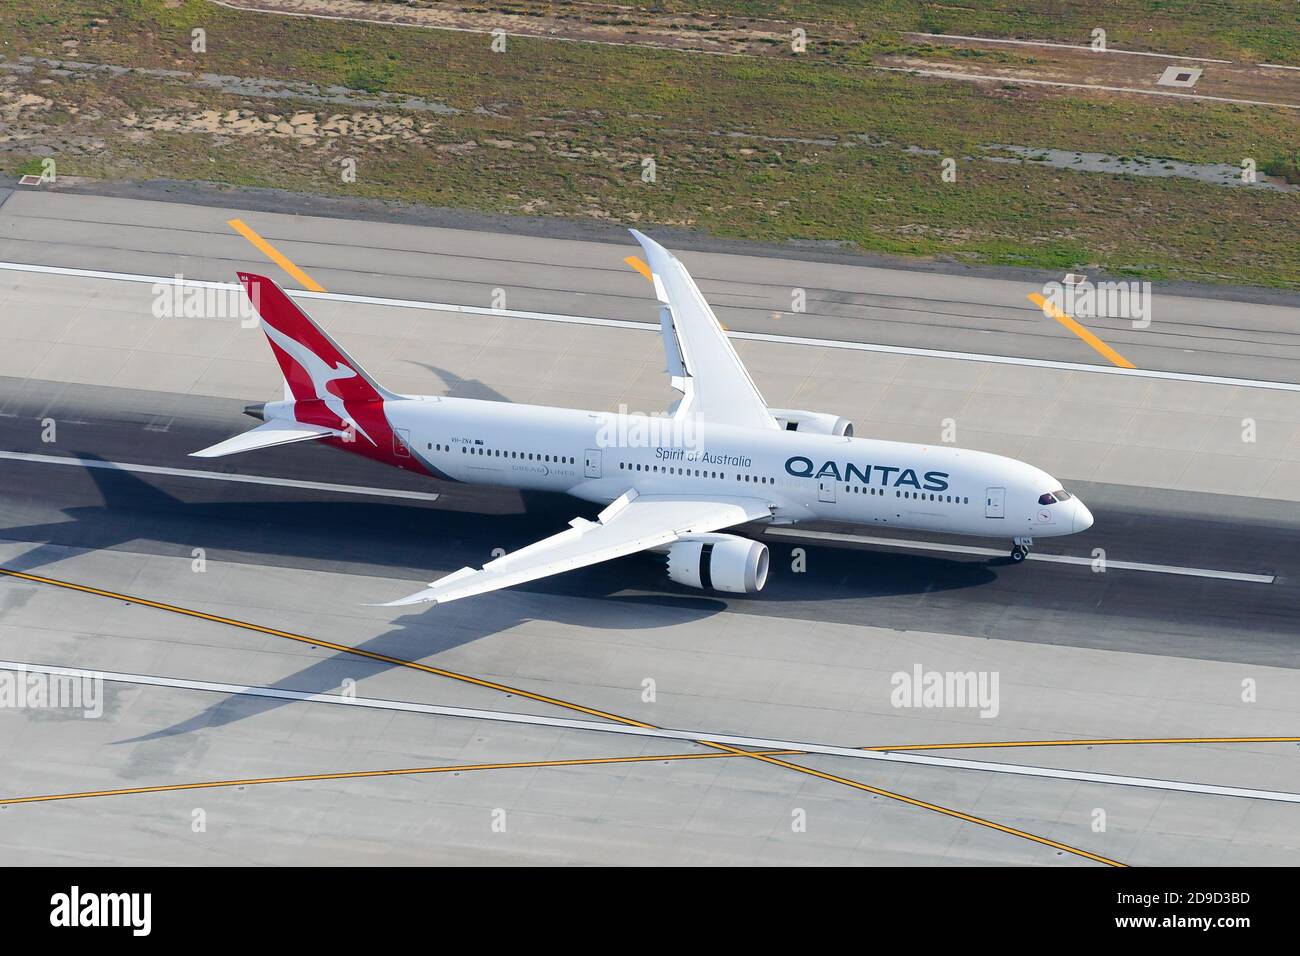 Qantas Airways Boeing 787 aircraft landing with spoilers and ailerons. Aerial view of Qantas Dreamliner plane with spoiler and airleron deployed. Stock Photo